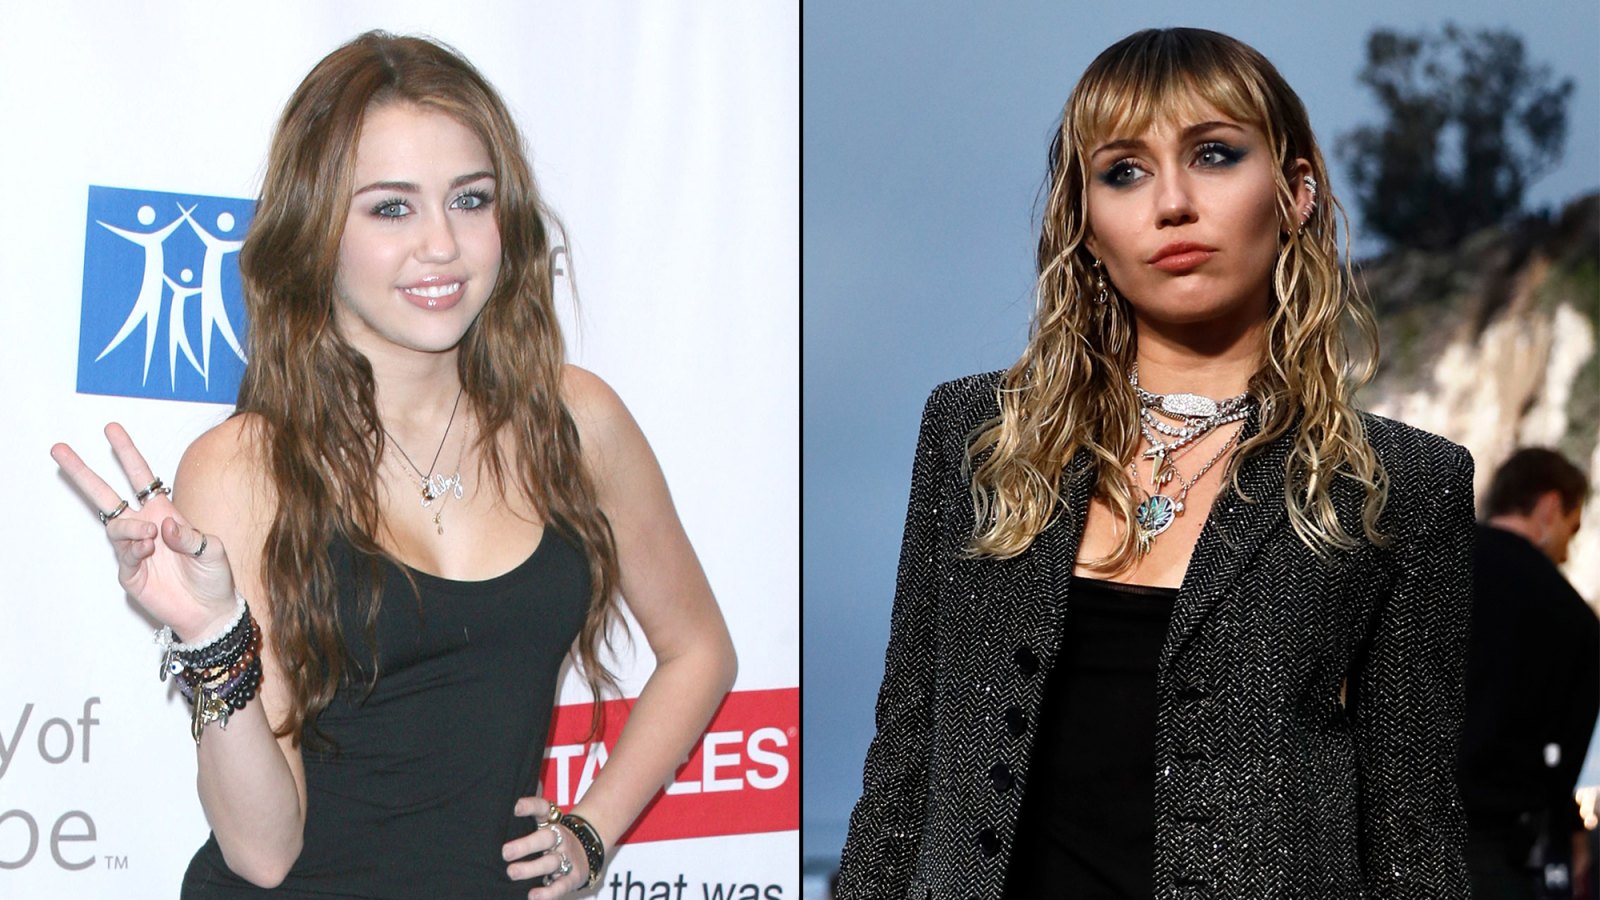 Miley Cyrus Deleted Her Twitter Years Ago